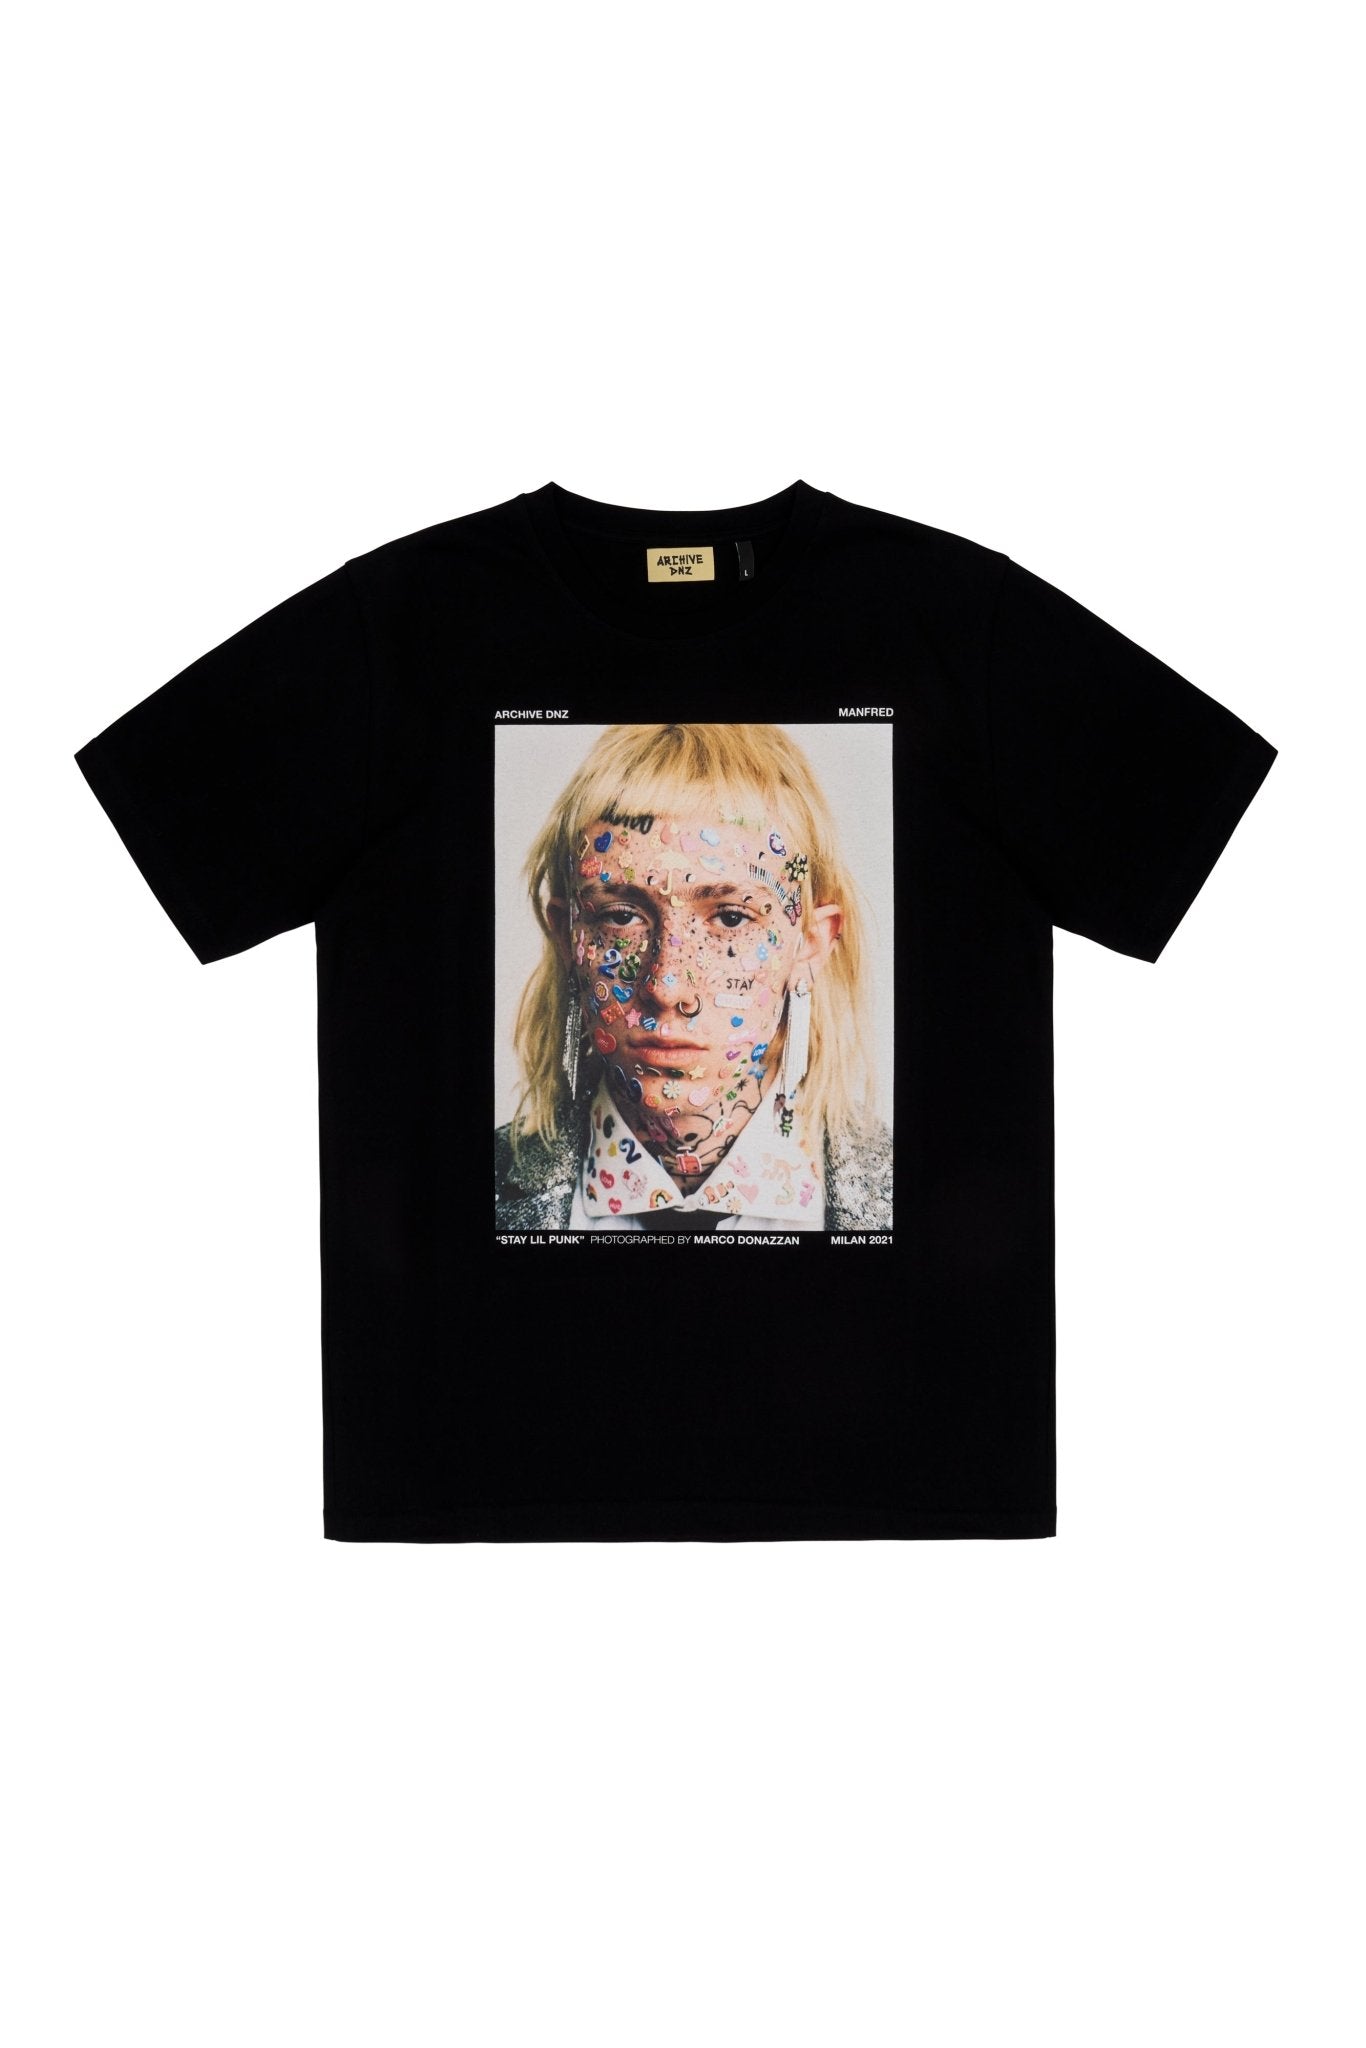 MANFRED T-SHIRT BLACK "Limited Edition" numbered - ARCHIVE DNZARCHIVE DNZARCHIVE DNZS